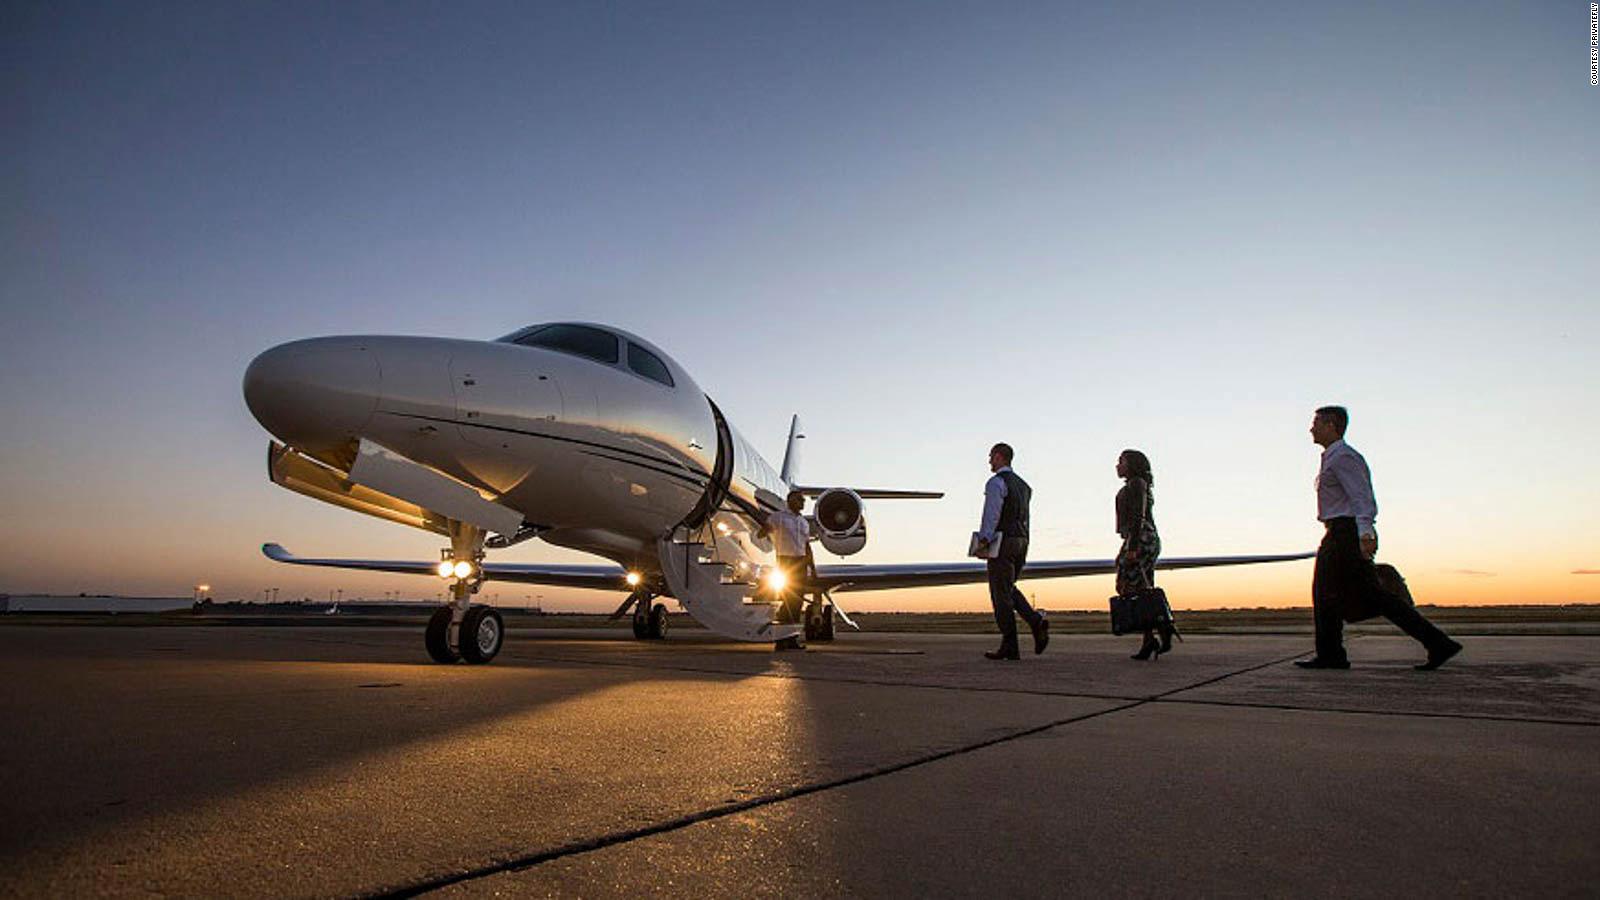 Jets : Izmmzmapomngvm : Our selection of private aircraft are available for private rental and charter.